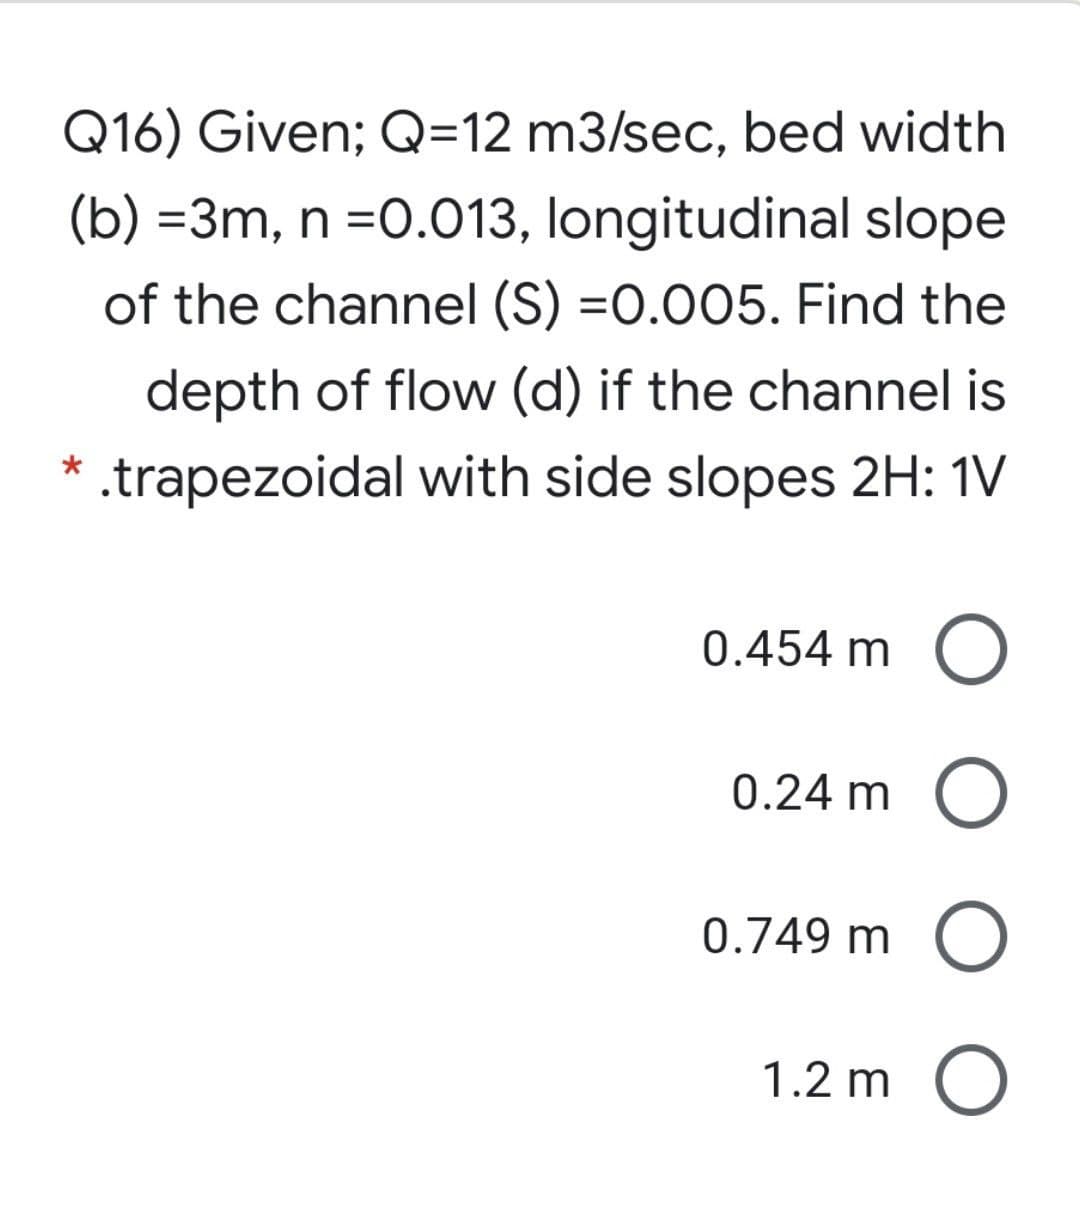 Q16) Given; Q=12 m3/sec, bed width
(b) =3m, n =0.013, longitudinal slope
of the channel (S) =0.005. Find the
depth of flow (d) if the channel is
.trapezoidal with side slopes 2H: 1V
0.454 m O
0.24 m O
0.749 m C
1.2 m O
